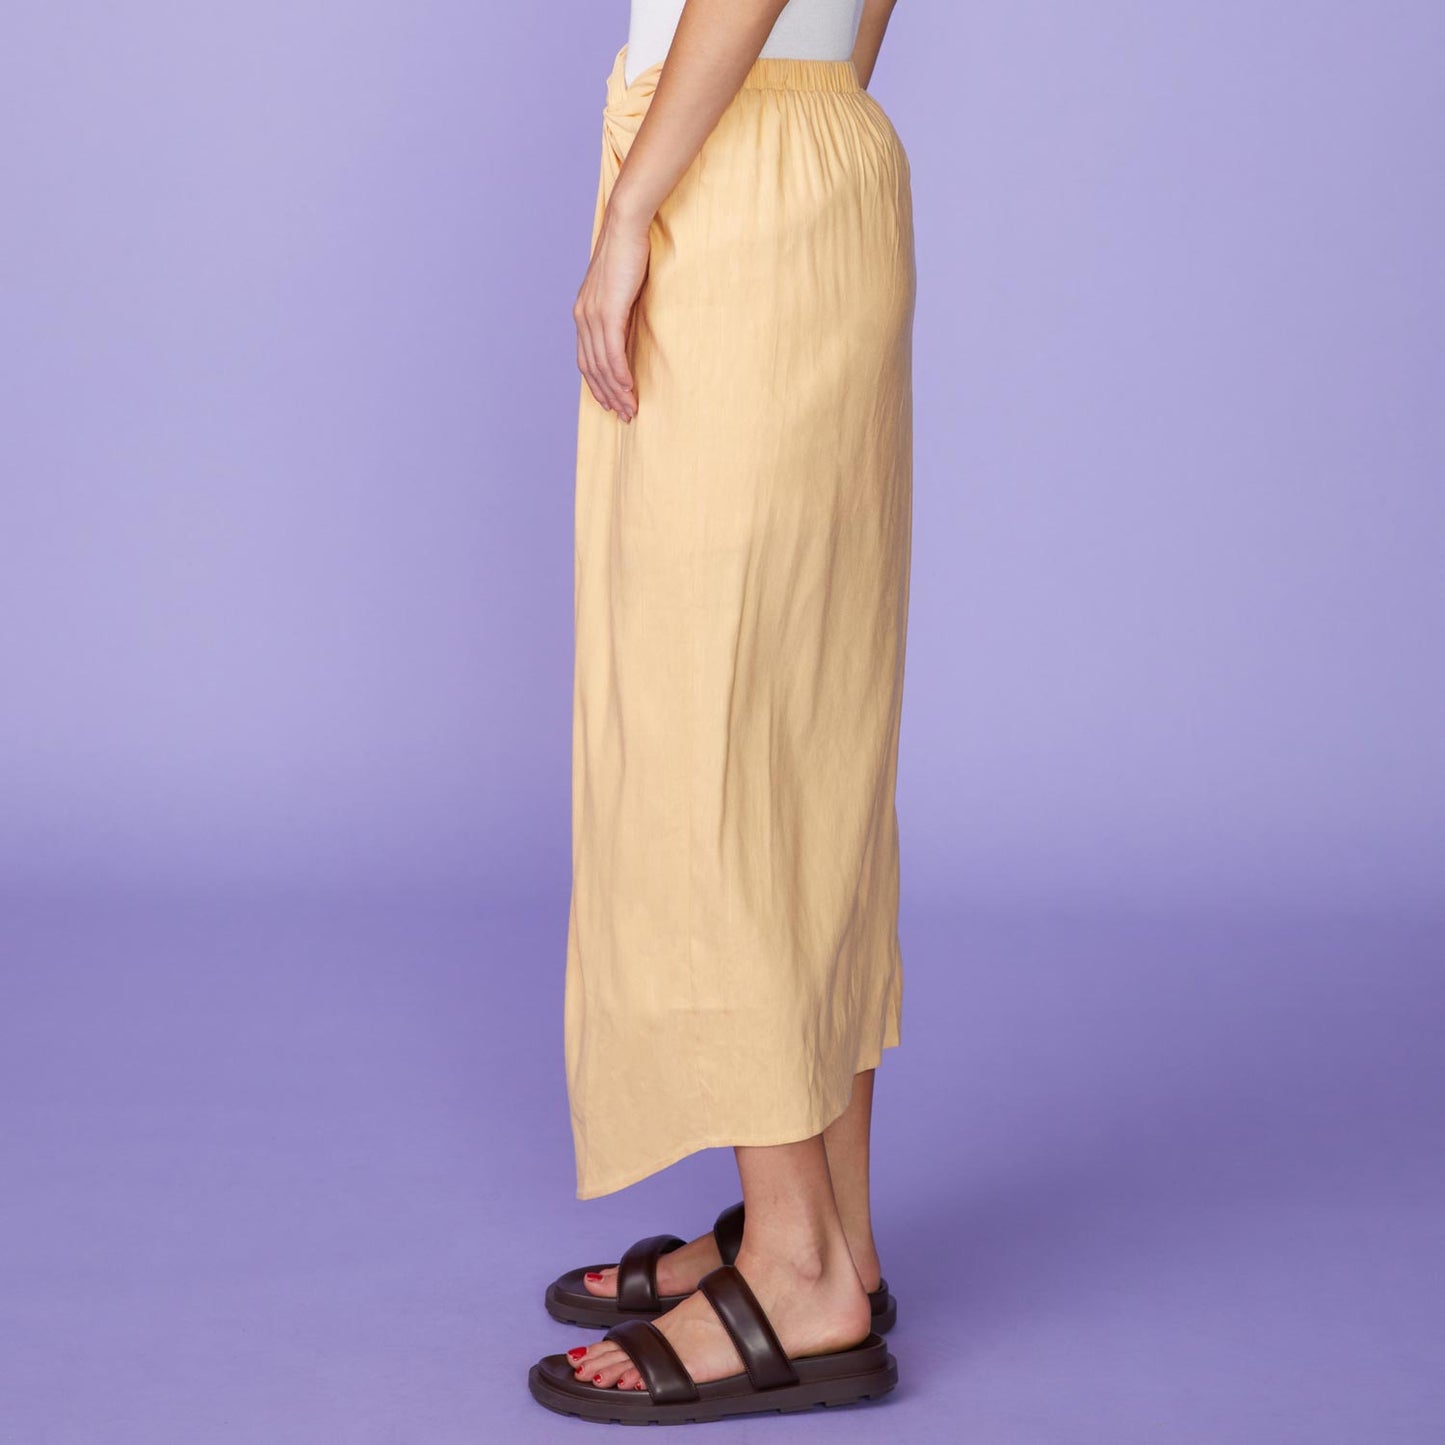 Side View of model wearing the Linen Sarong Skirt in Sand